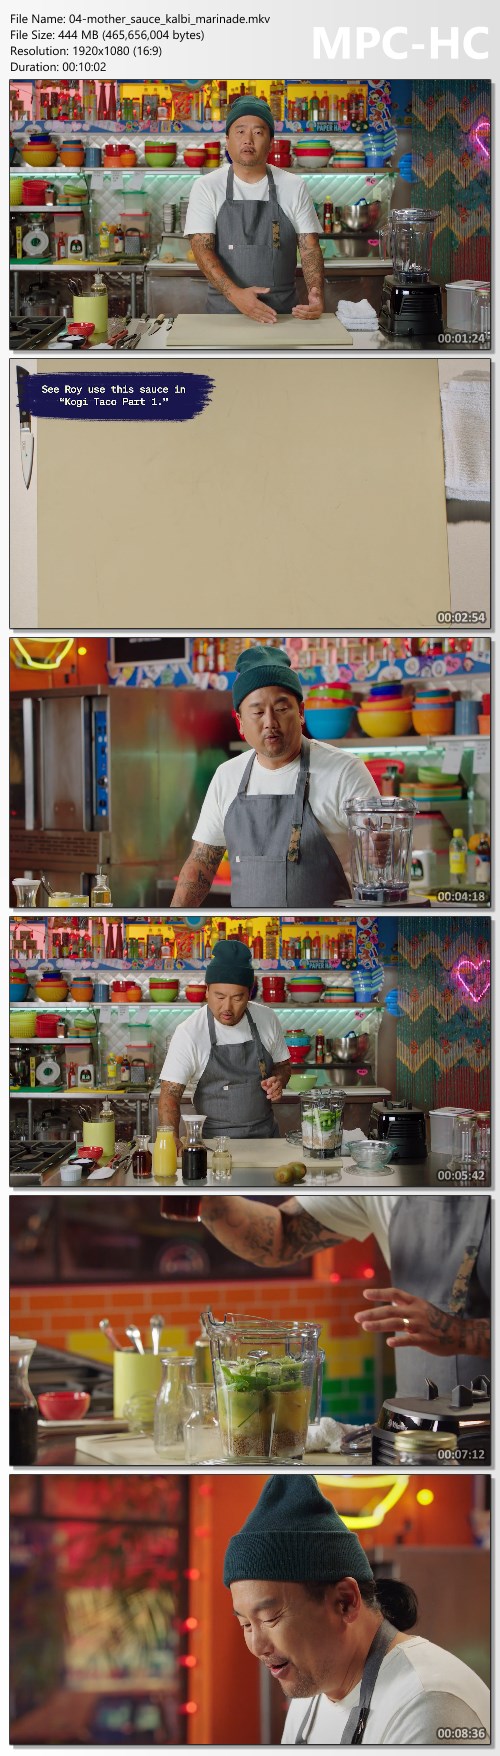 MasterClass - Roy Choi Teaches Intuitive Cooking